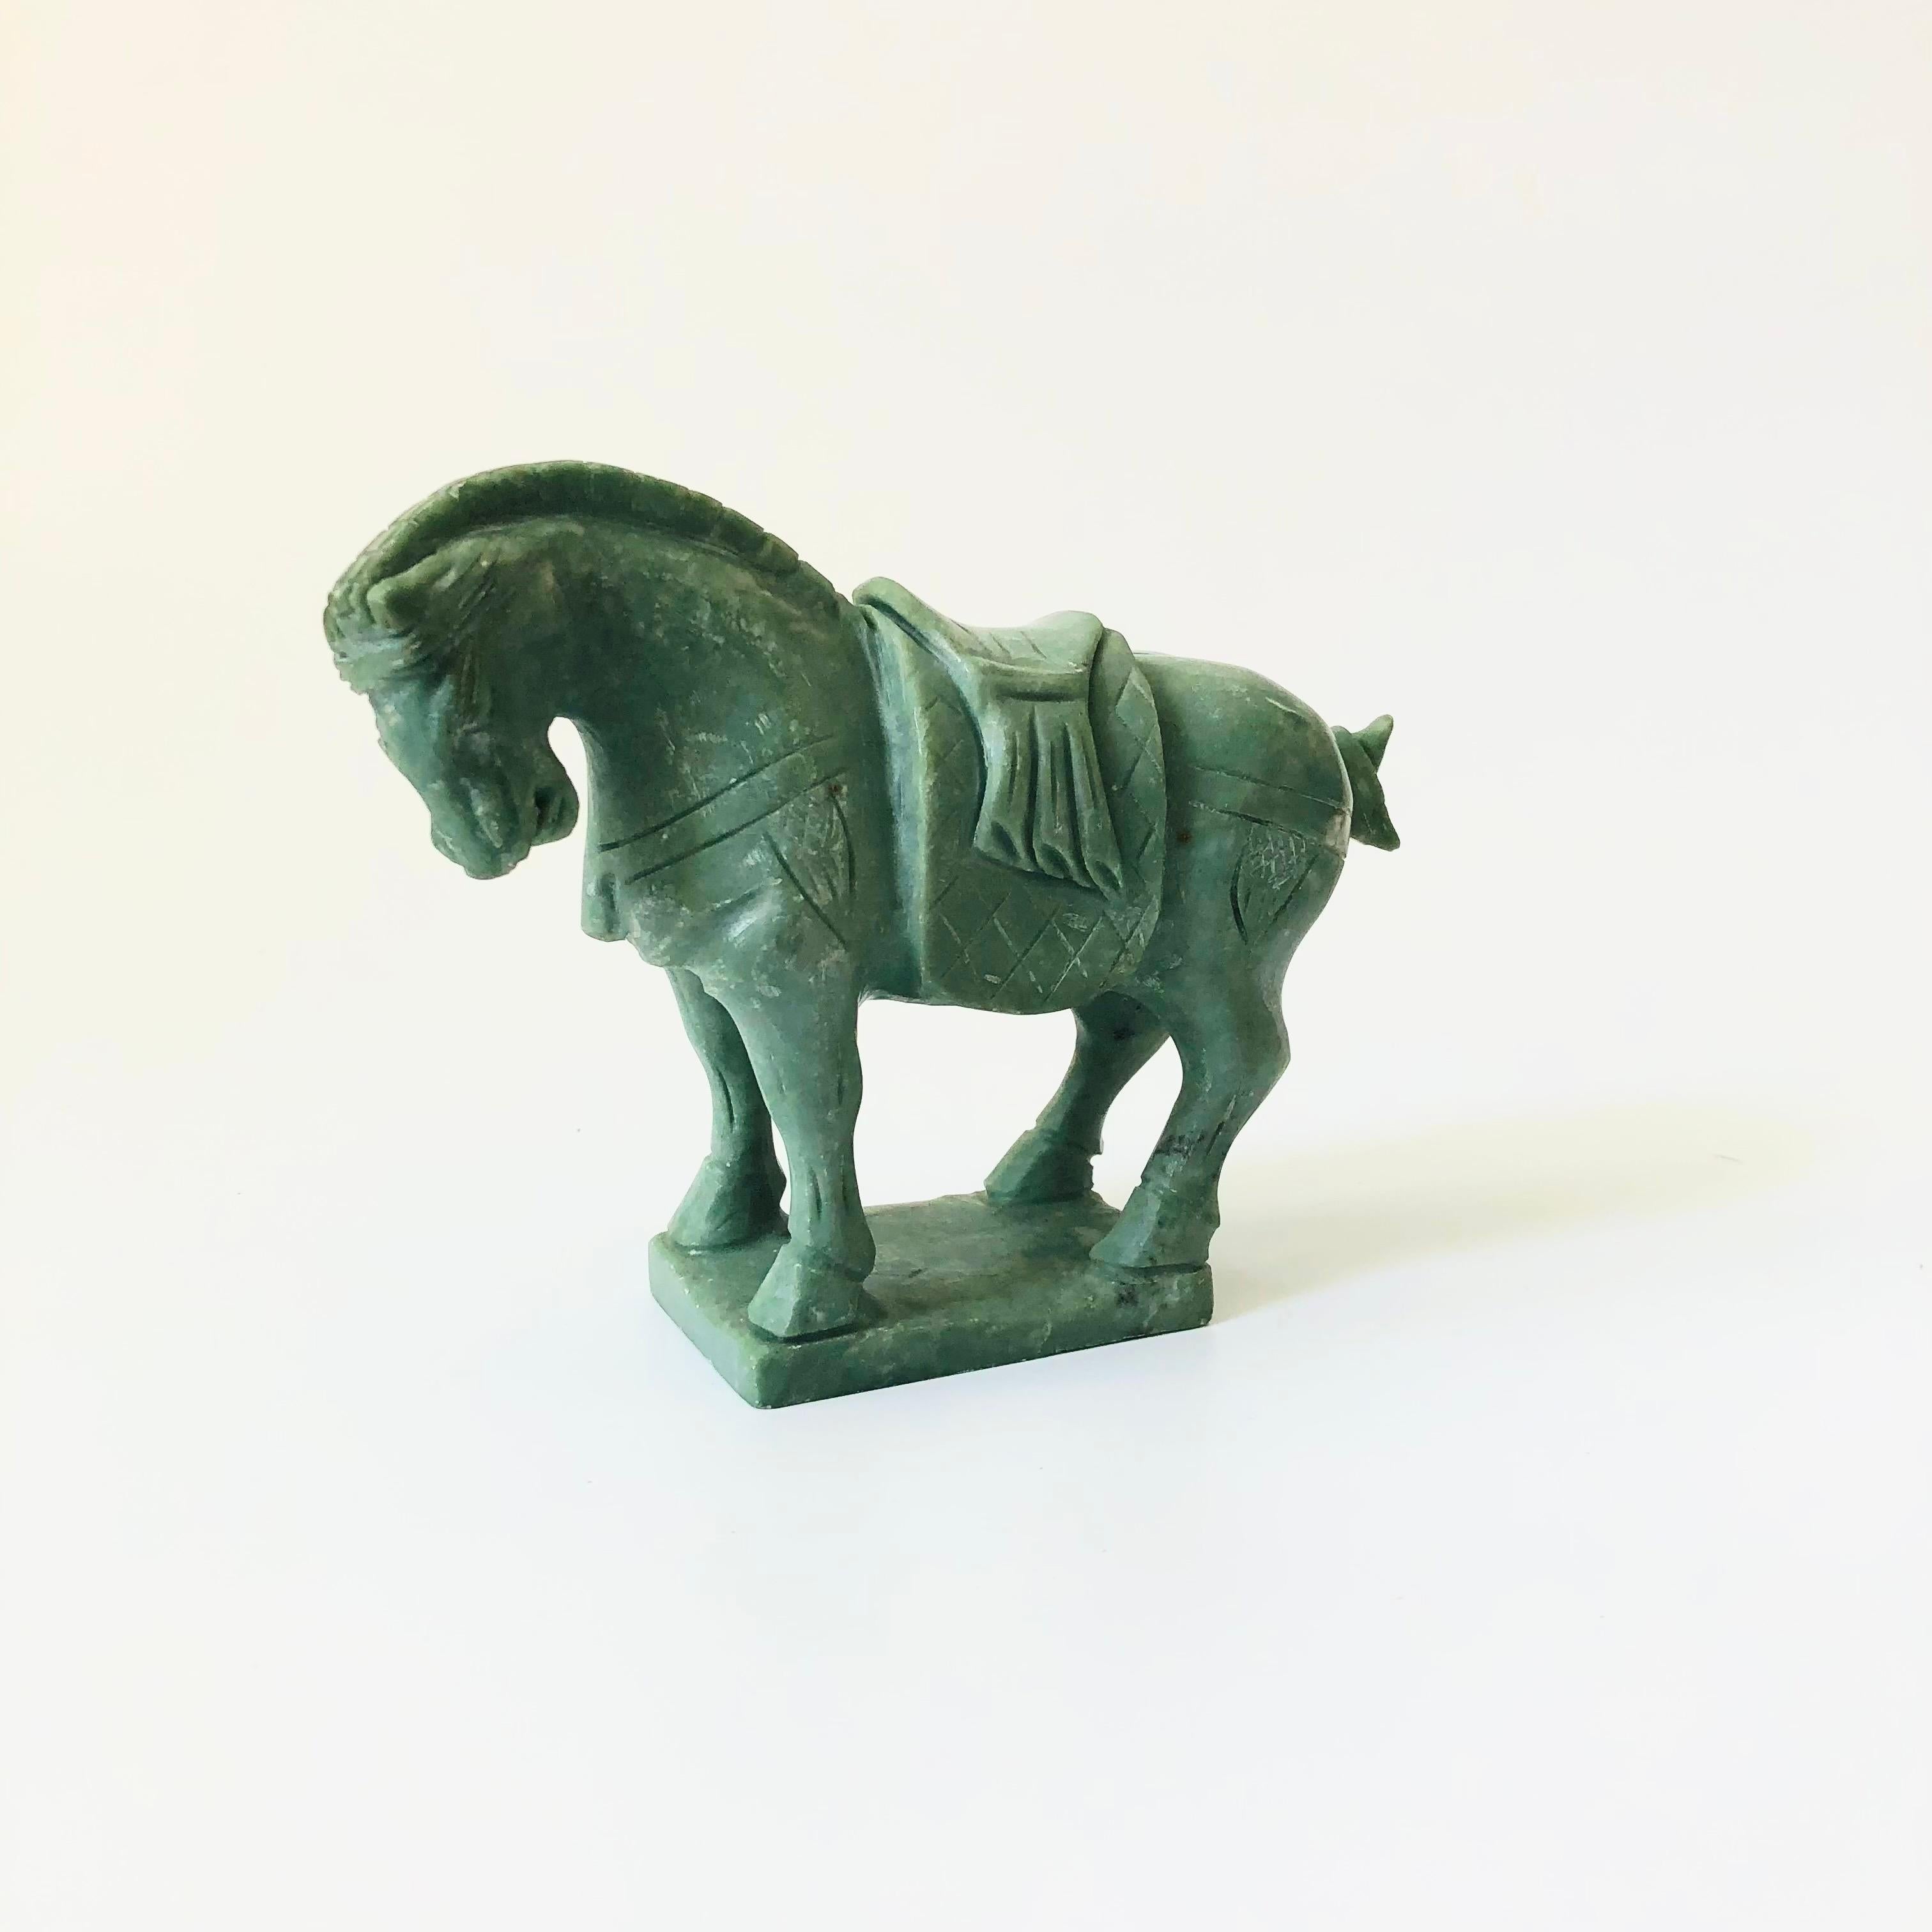 A vintage carved stone horse. Beautiful green color to the stone, believed to be jade.

